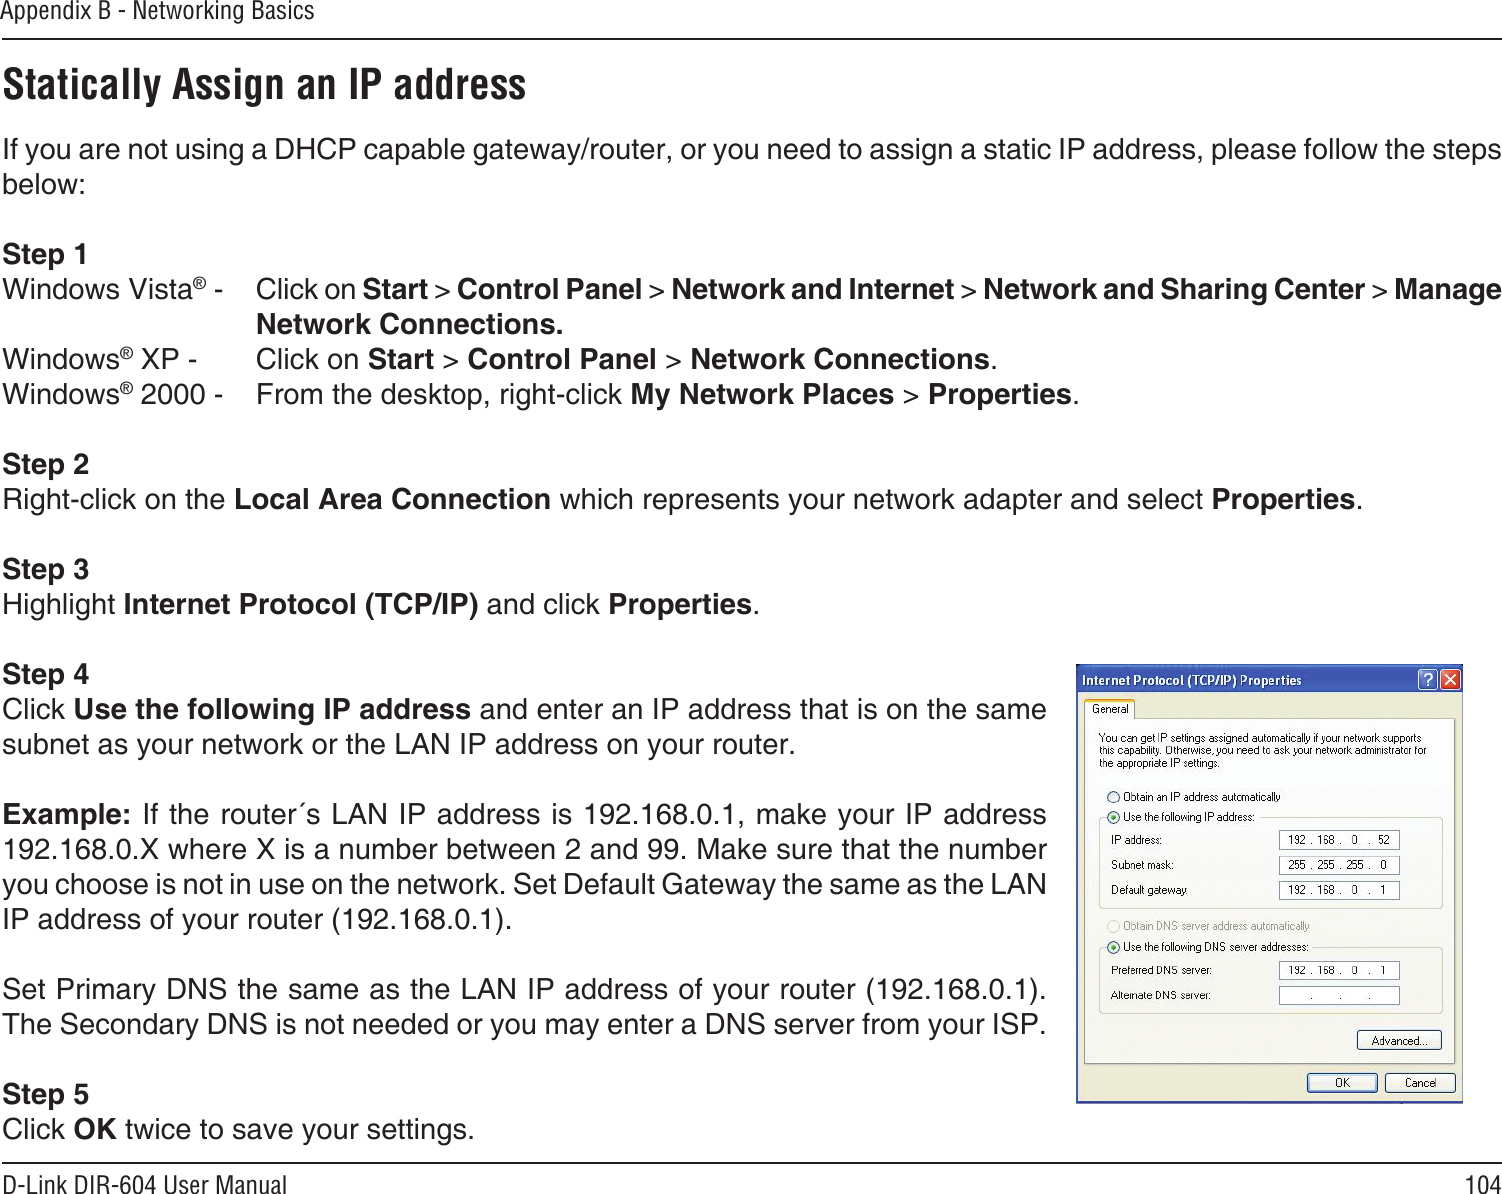 104D-Link DIR-604 User ManualAppendix B - Networking BasicsStatically Assign an IP addressIf you are not using a DHCP capable gateway/router, or you need to assign a static IP address, please follow the steps below:Step 1Windows Vista® -  Click on Start &gt; Control Panel &gt; Network and Internet &gt; Network and Sharing Center &gt; Manage Network Connections.Windows® XP -  Click on Start &gt; Control Panel &gt; Network Connections.Windows® 2000 -  From the desktop, right-click My Network Places &gt; Properties.Step 2Right-click on the Local Area Connection which represents your network adapter and select Properties.Step 3Highlight Internet Protocol (TCP/IP) and click Properties.Step 4Click Use the following IP address and enter an IP address that is on the same subnet as your network or the LAN IP address on your router. Example: If the router´s LAN IP address is 192.168.0.1, make your IP address 192.168.0.X where X is a number between 2 and 99. Make sure that the number you choose is not in use on the network. Set Default Gateway the same as the LAN IP address of your router (192.168.0.1). Set Primary DNS the same as the LAN IP address of your router (192.168.0.1). The Secondary DNS is not needed or you may enter a DNS server from your ISP.Step 5Click OK twice to save your settings.